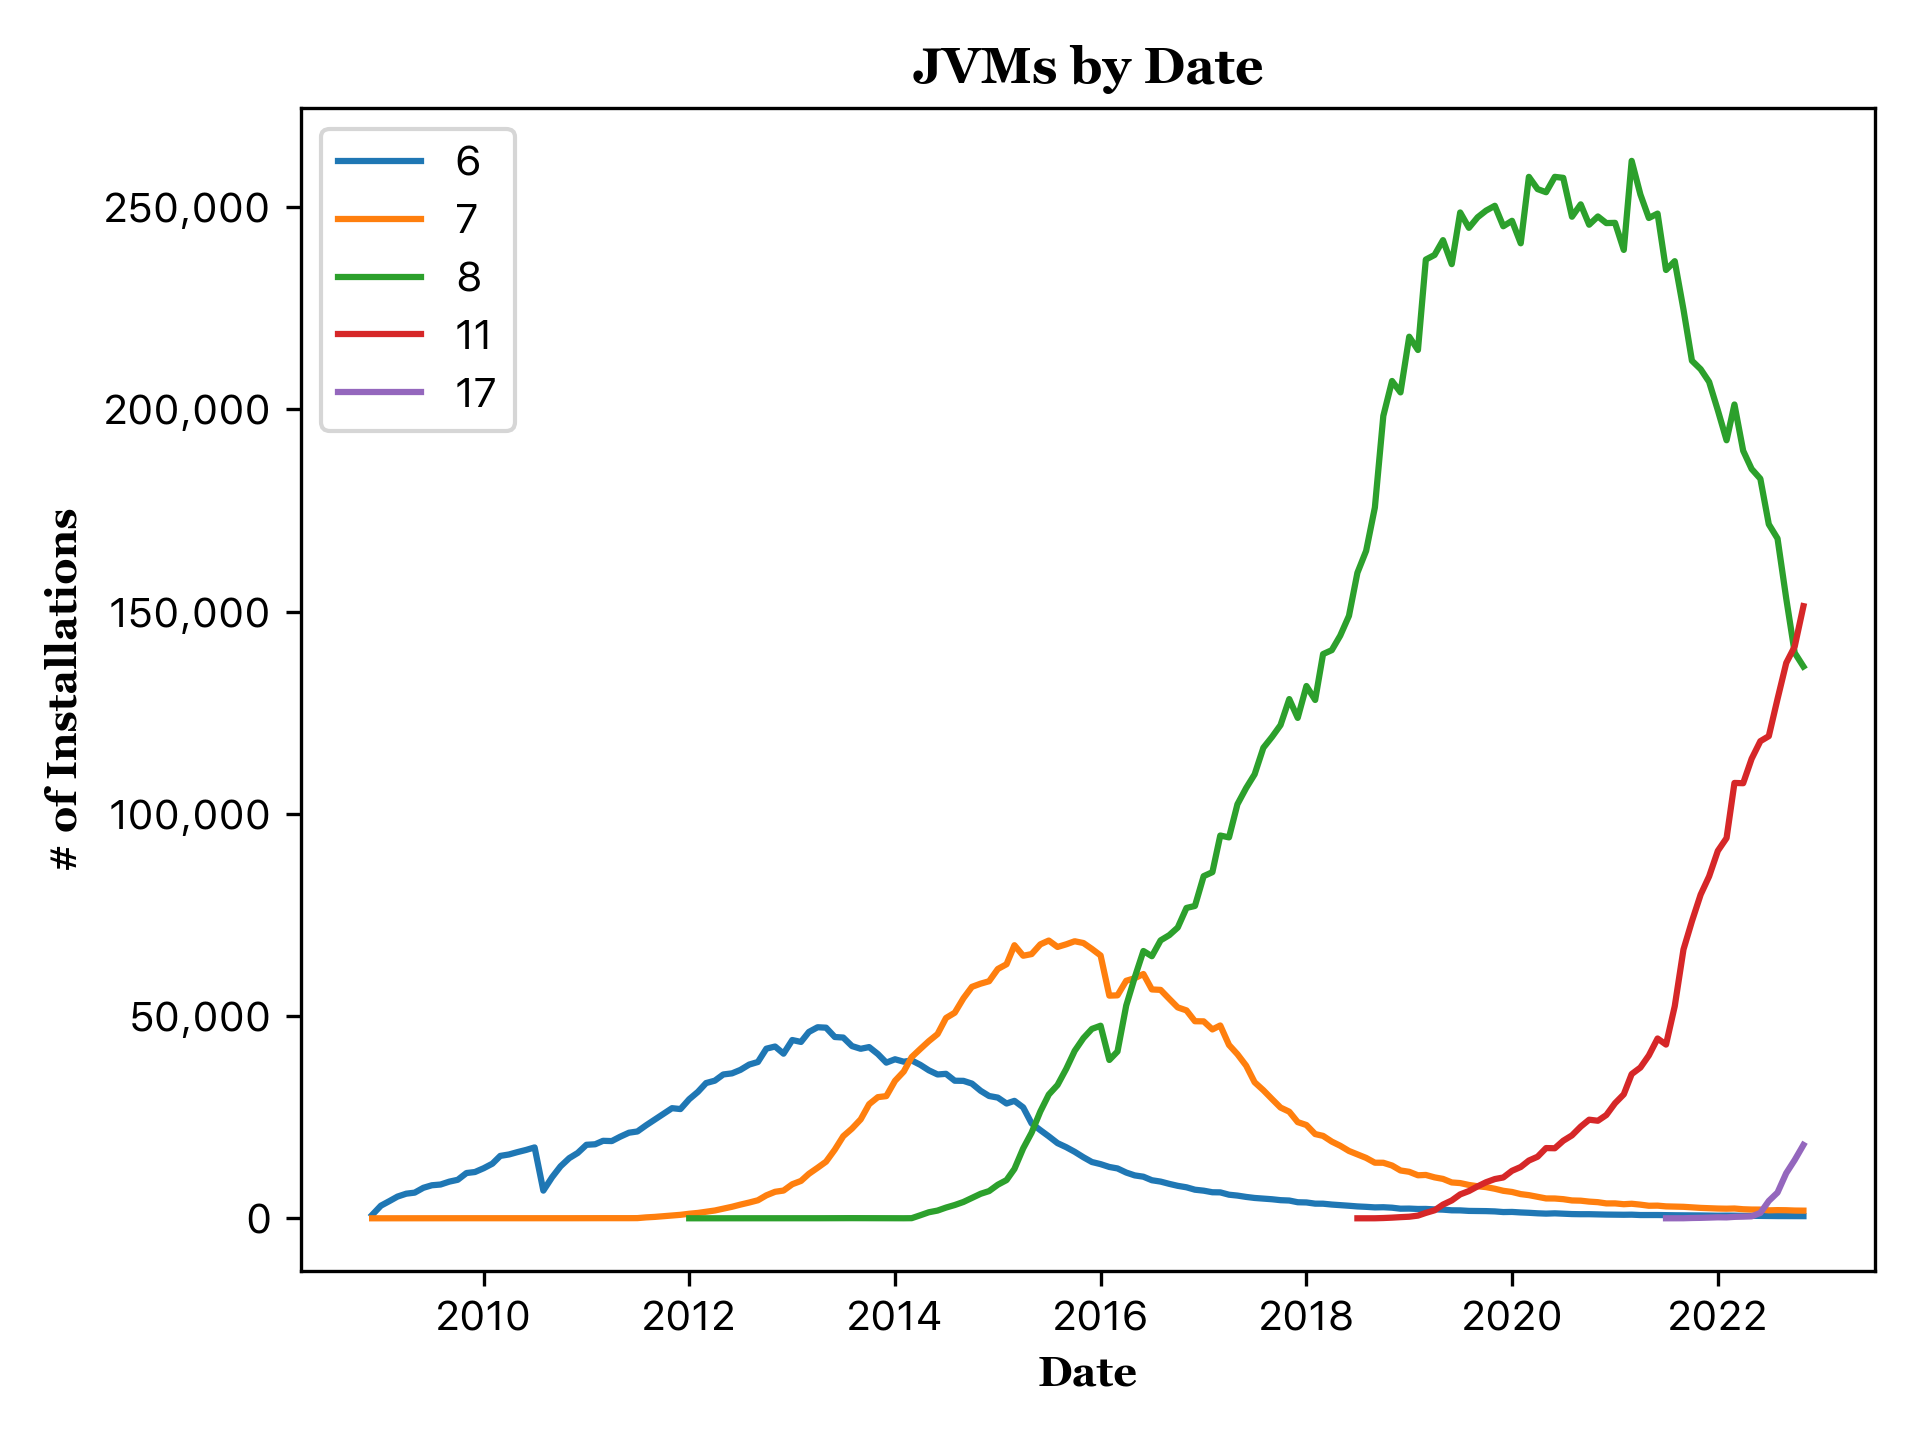 JVMS by date as of November 2022